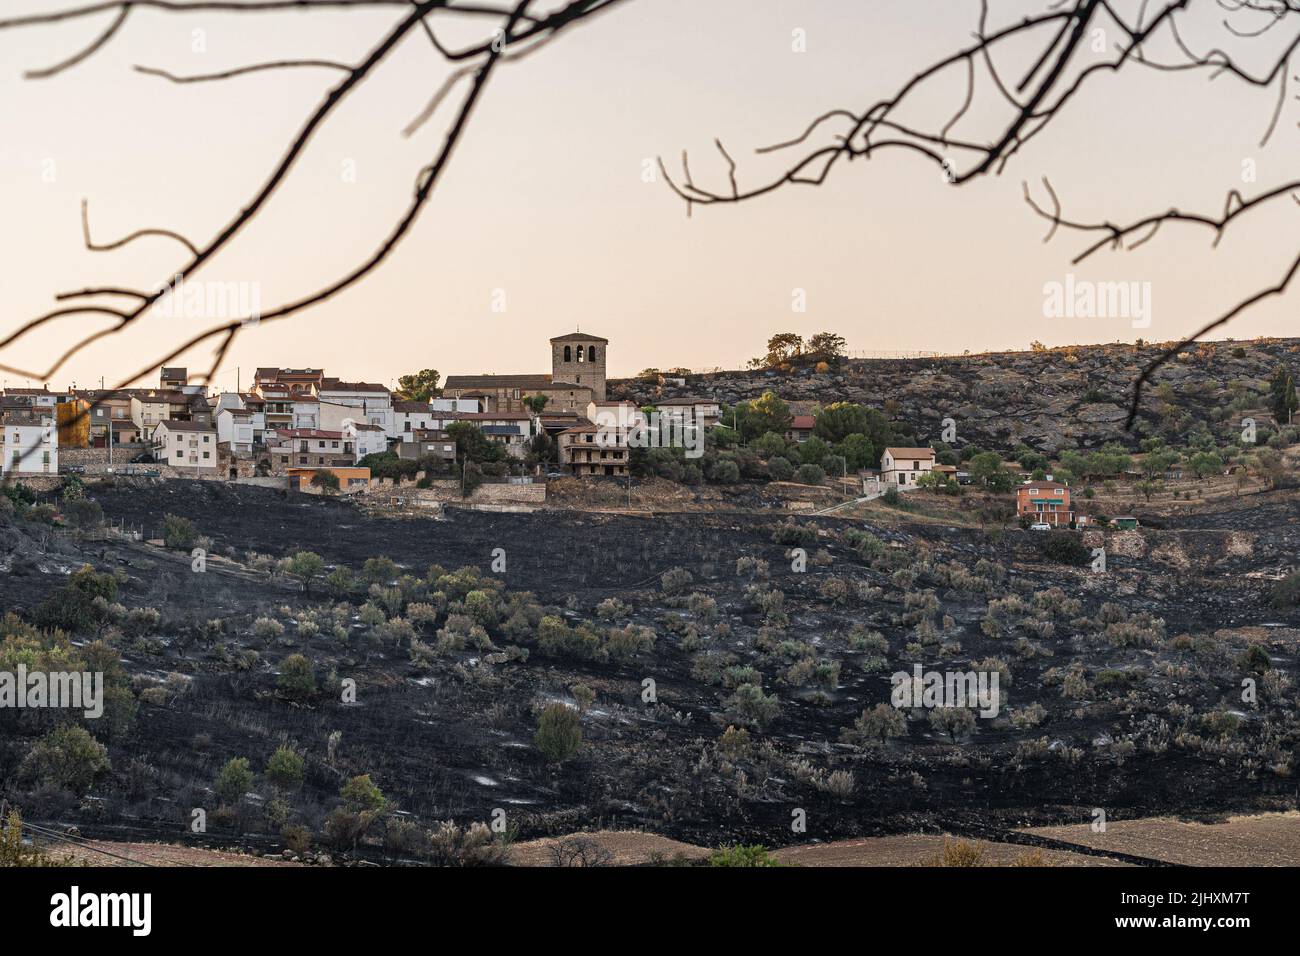 The slopes of Valdepeñas de la Sierra devastated by the flames of the fire. The fire did not affect the buildings. The Red Cross shelter in the town of Uceda, next to Valdepeñas de la Sierra, welcomed more than 150 people from the towns affected by the fire. The forest fire that lasted more than 48 hours in Valdepeñas de la Sierra, 80 kilometers from Madrid, Spain, destroyed more than 3,000 hectares. The authorities suspect that the fire could have been caused by a pyromaniac during the days of high heat temperatures recorded in Spain. Stock Photo